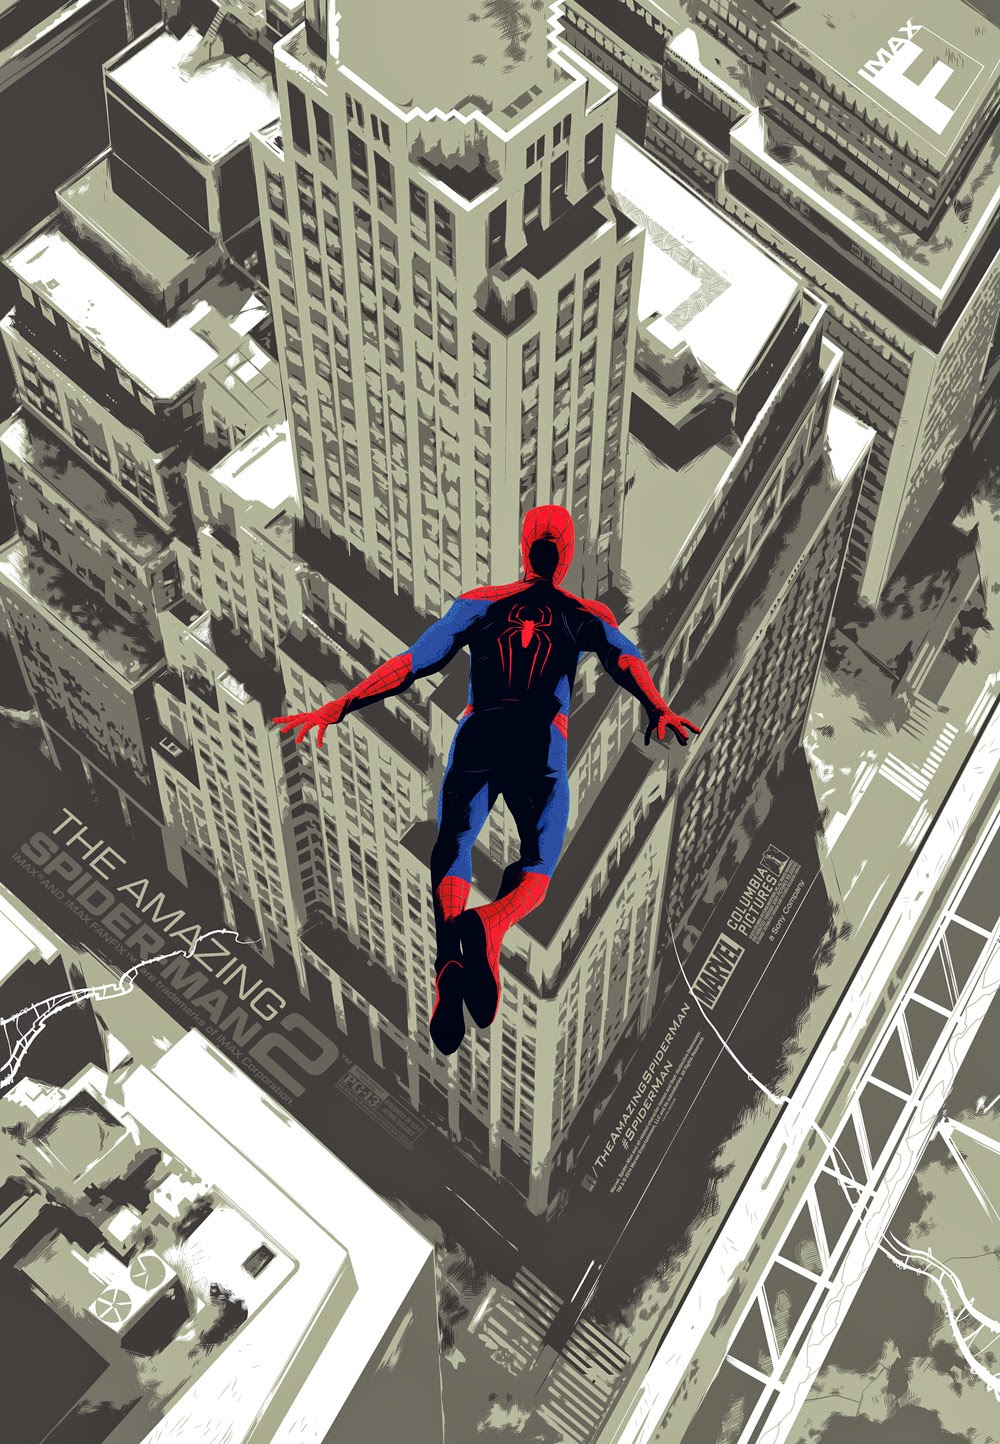 The Amazing Spider-Man 2 IMAX Opening Night Movie Poster by Matt Taylor